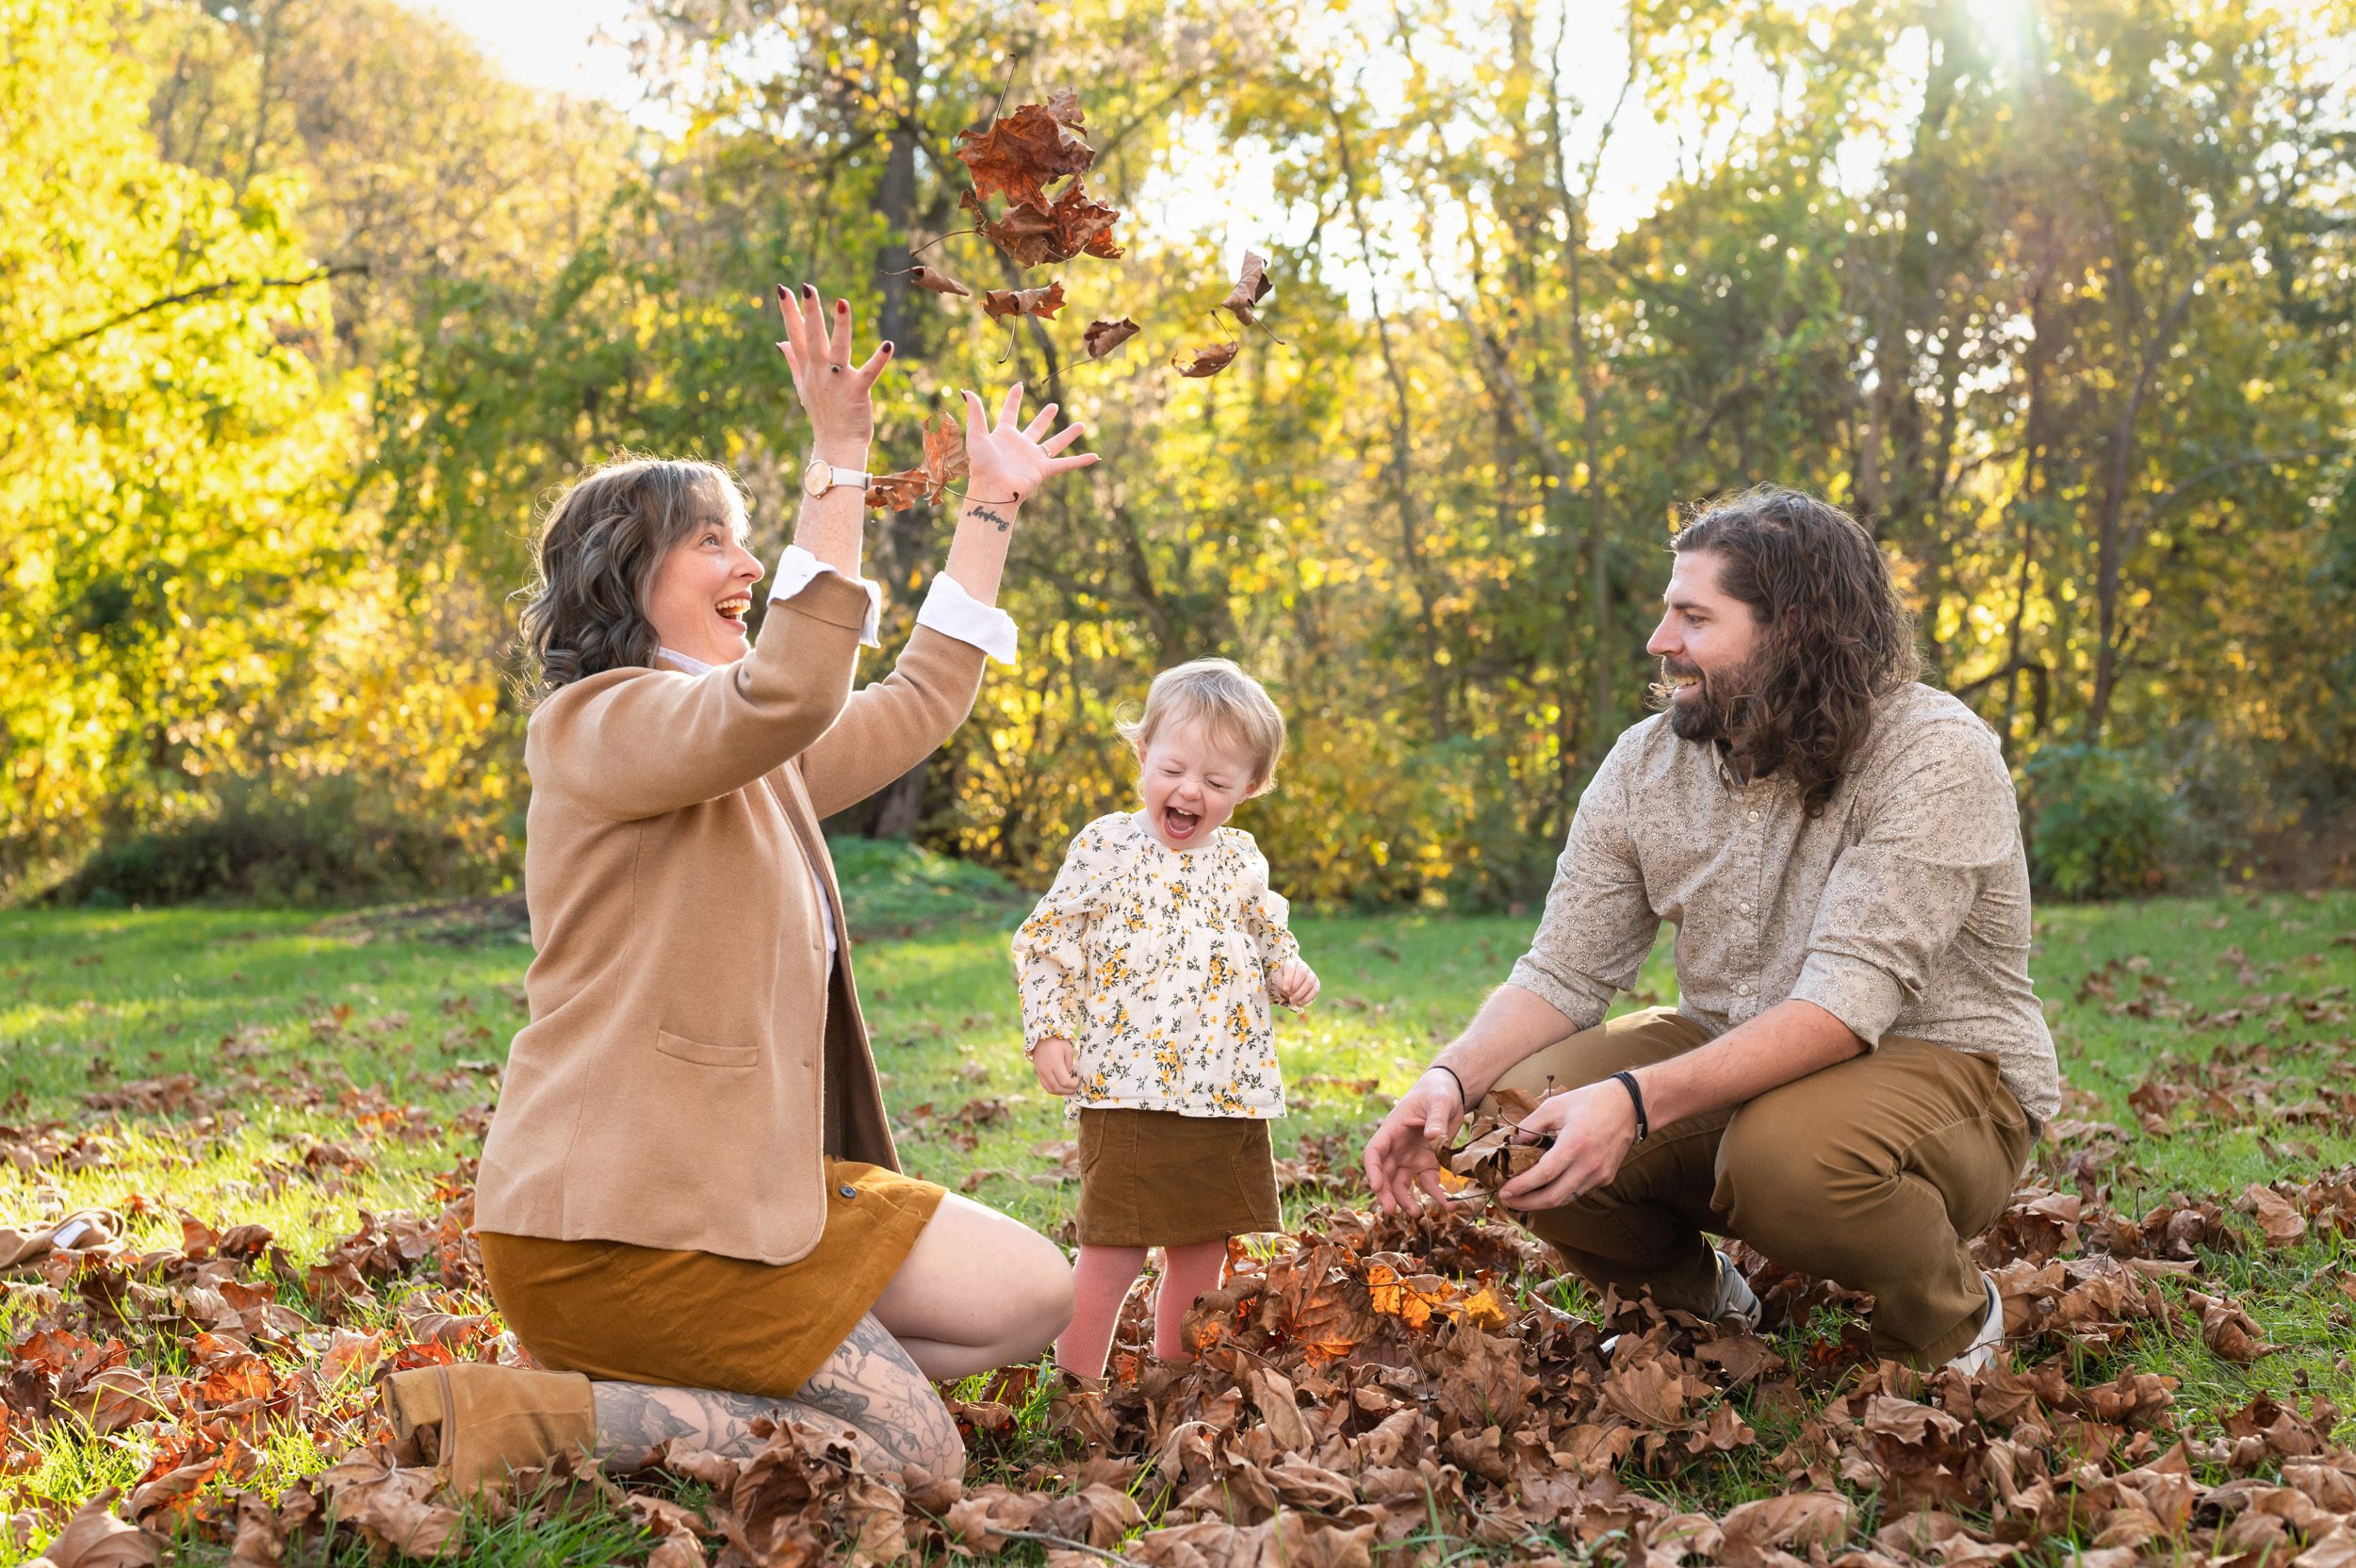 A little girl squealing with excitement as her mom and dad kneel beside her and throw leaves up in the air during a family photoshoot